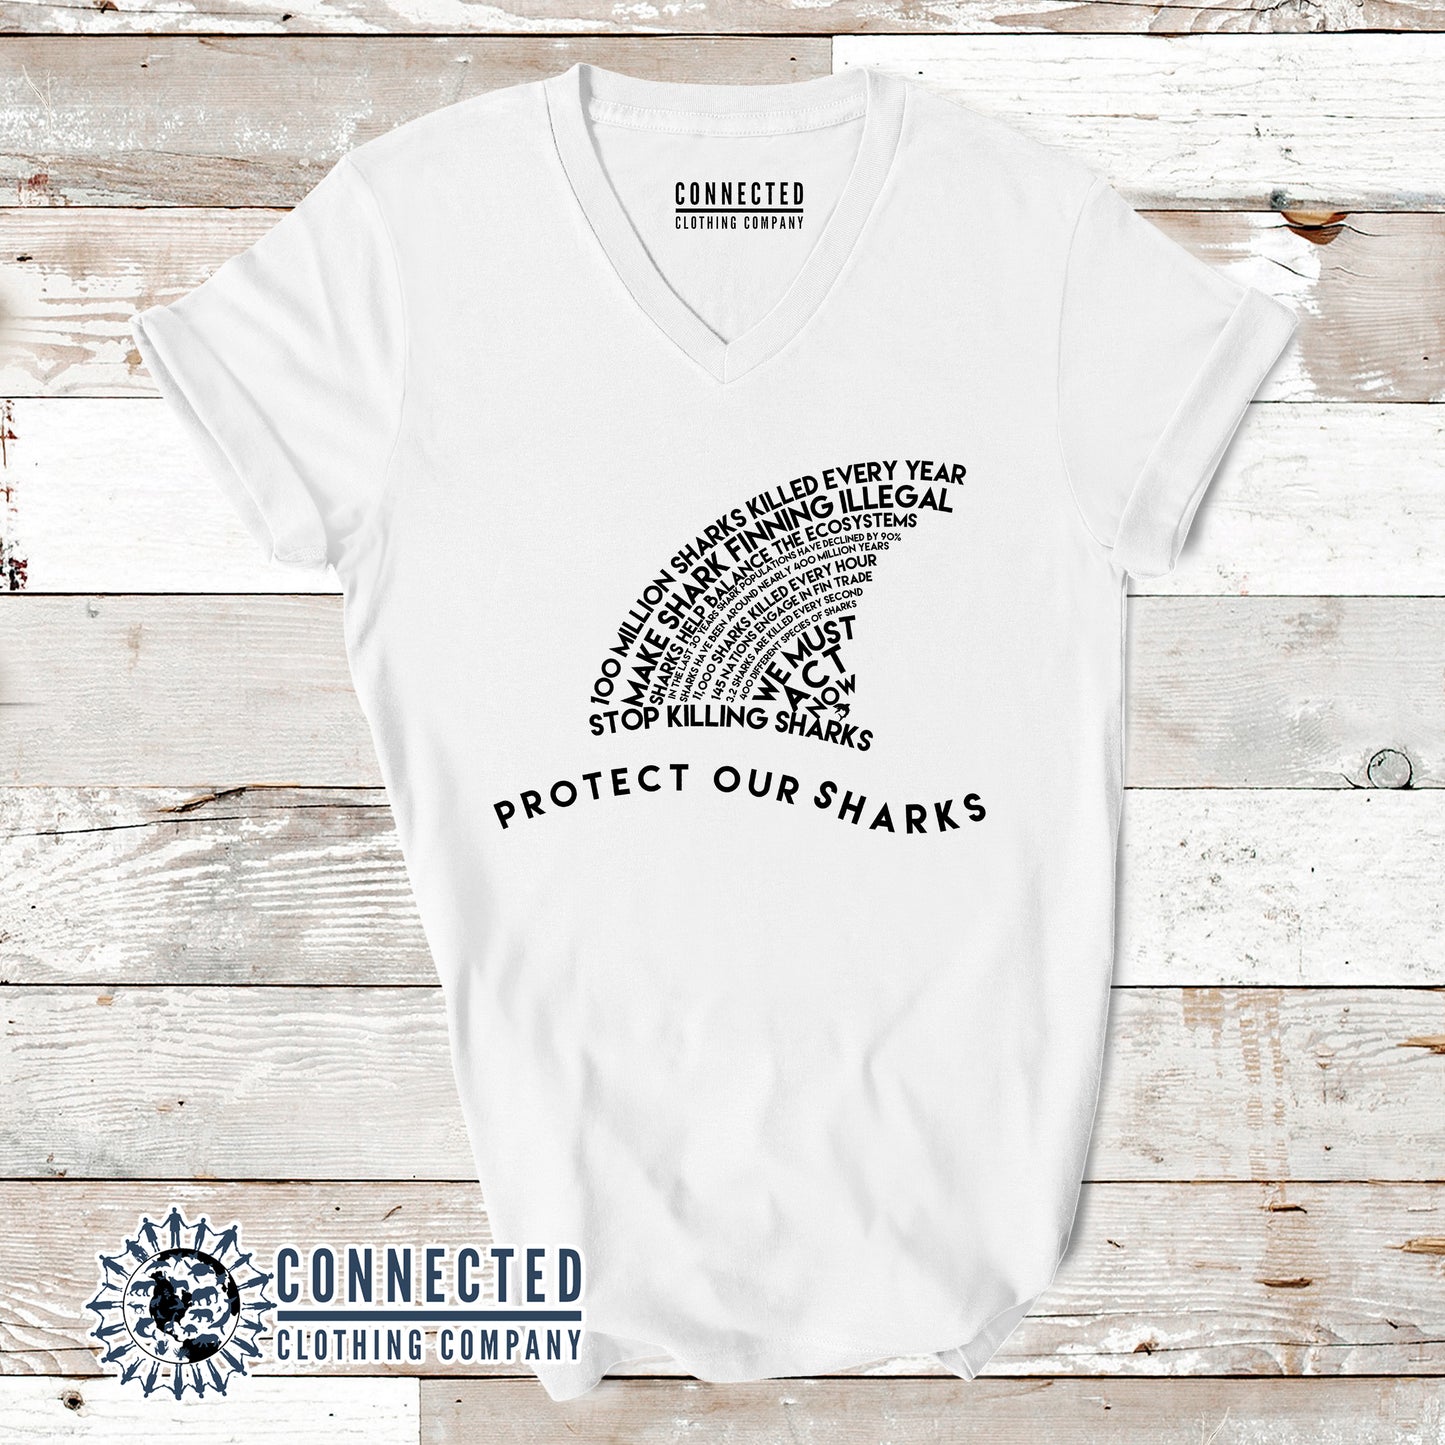 White Protect Our Sharks Short-Sleeve Women's V-Neck Tee - Connected Clothing Company - Ethically and Sustainably Made - 10% of profits donated to shark conservation